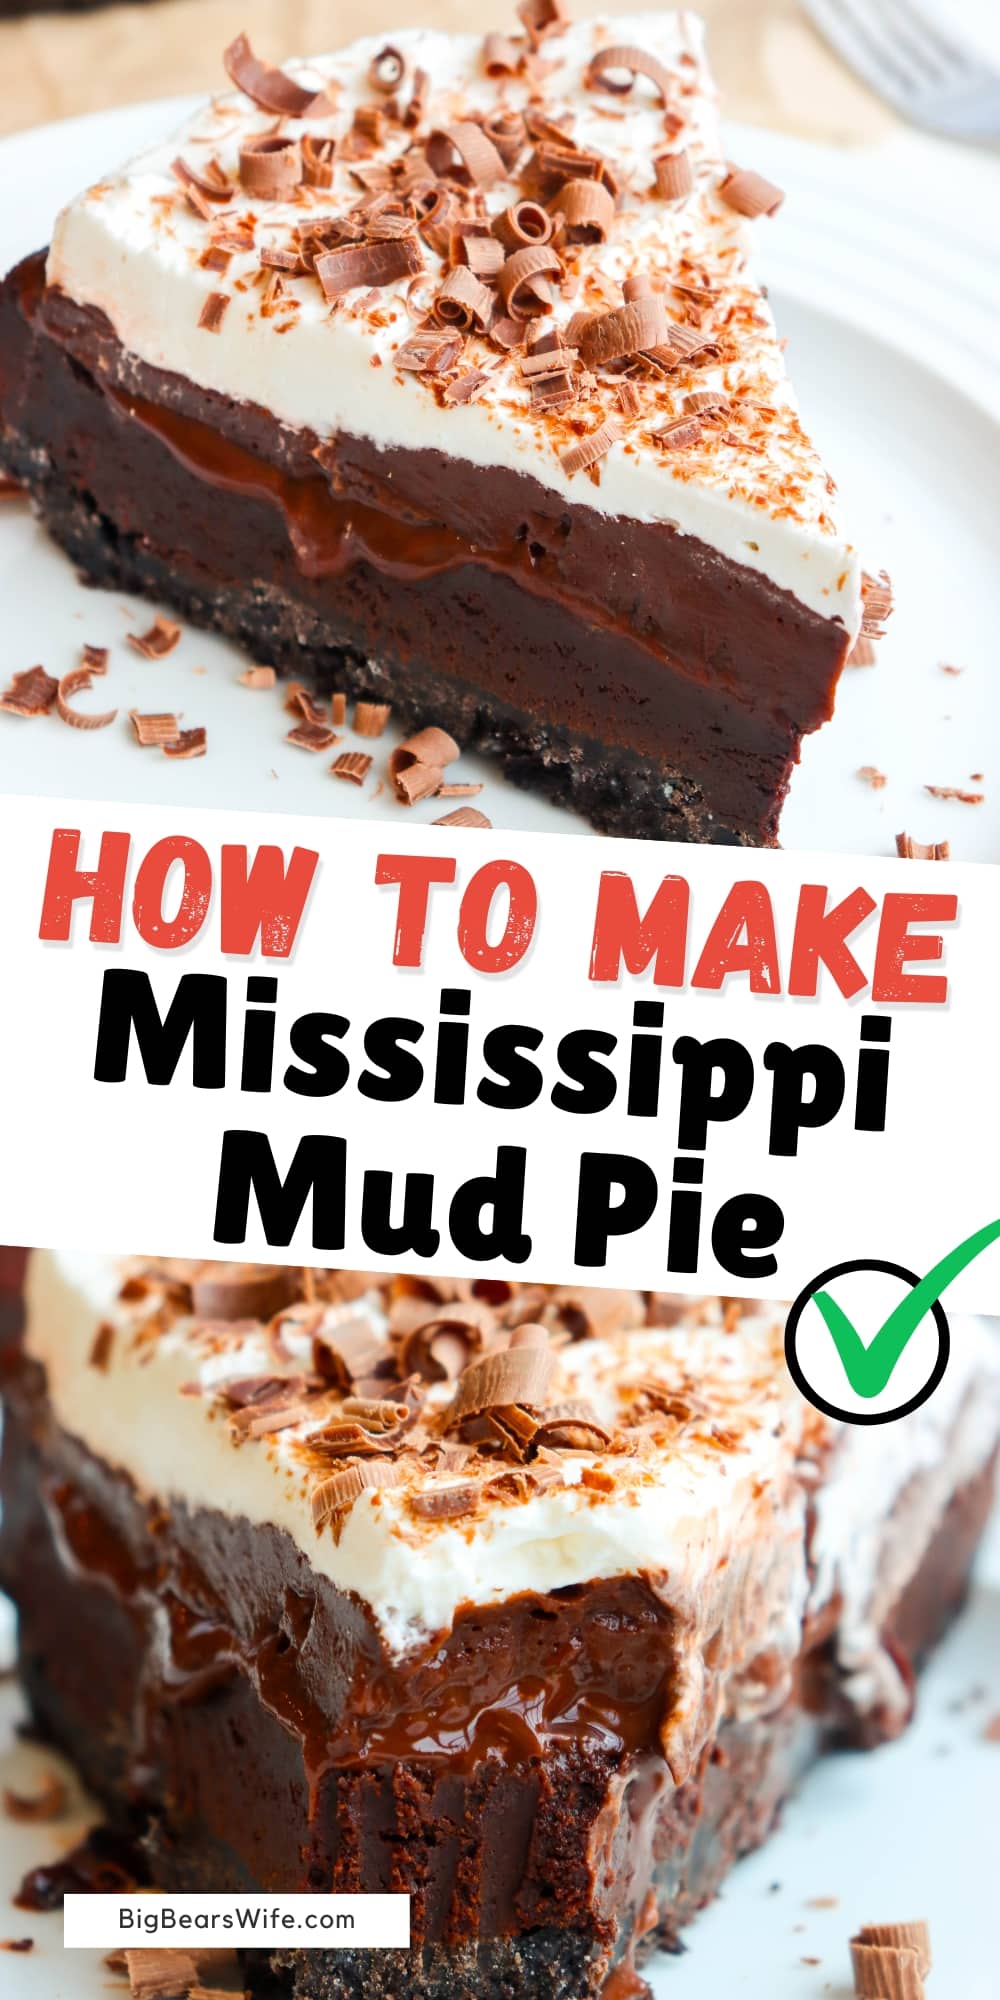 Calling all chocolate fanatics! Prepare to be blown away by the ultimate Mississippi Mud Pie recipe that will transport you to dessert heaven. Dive into a luscious chocolate crust, followed by layers of fudgy brownie, hot fudge sauce and chocolate pudding . Then it is finished with a homemade whipped cream topping and chocolate shavings. This is the dessert dreams are made of! via @bigbearswife